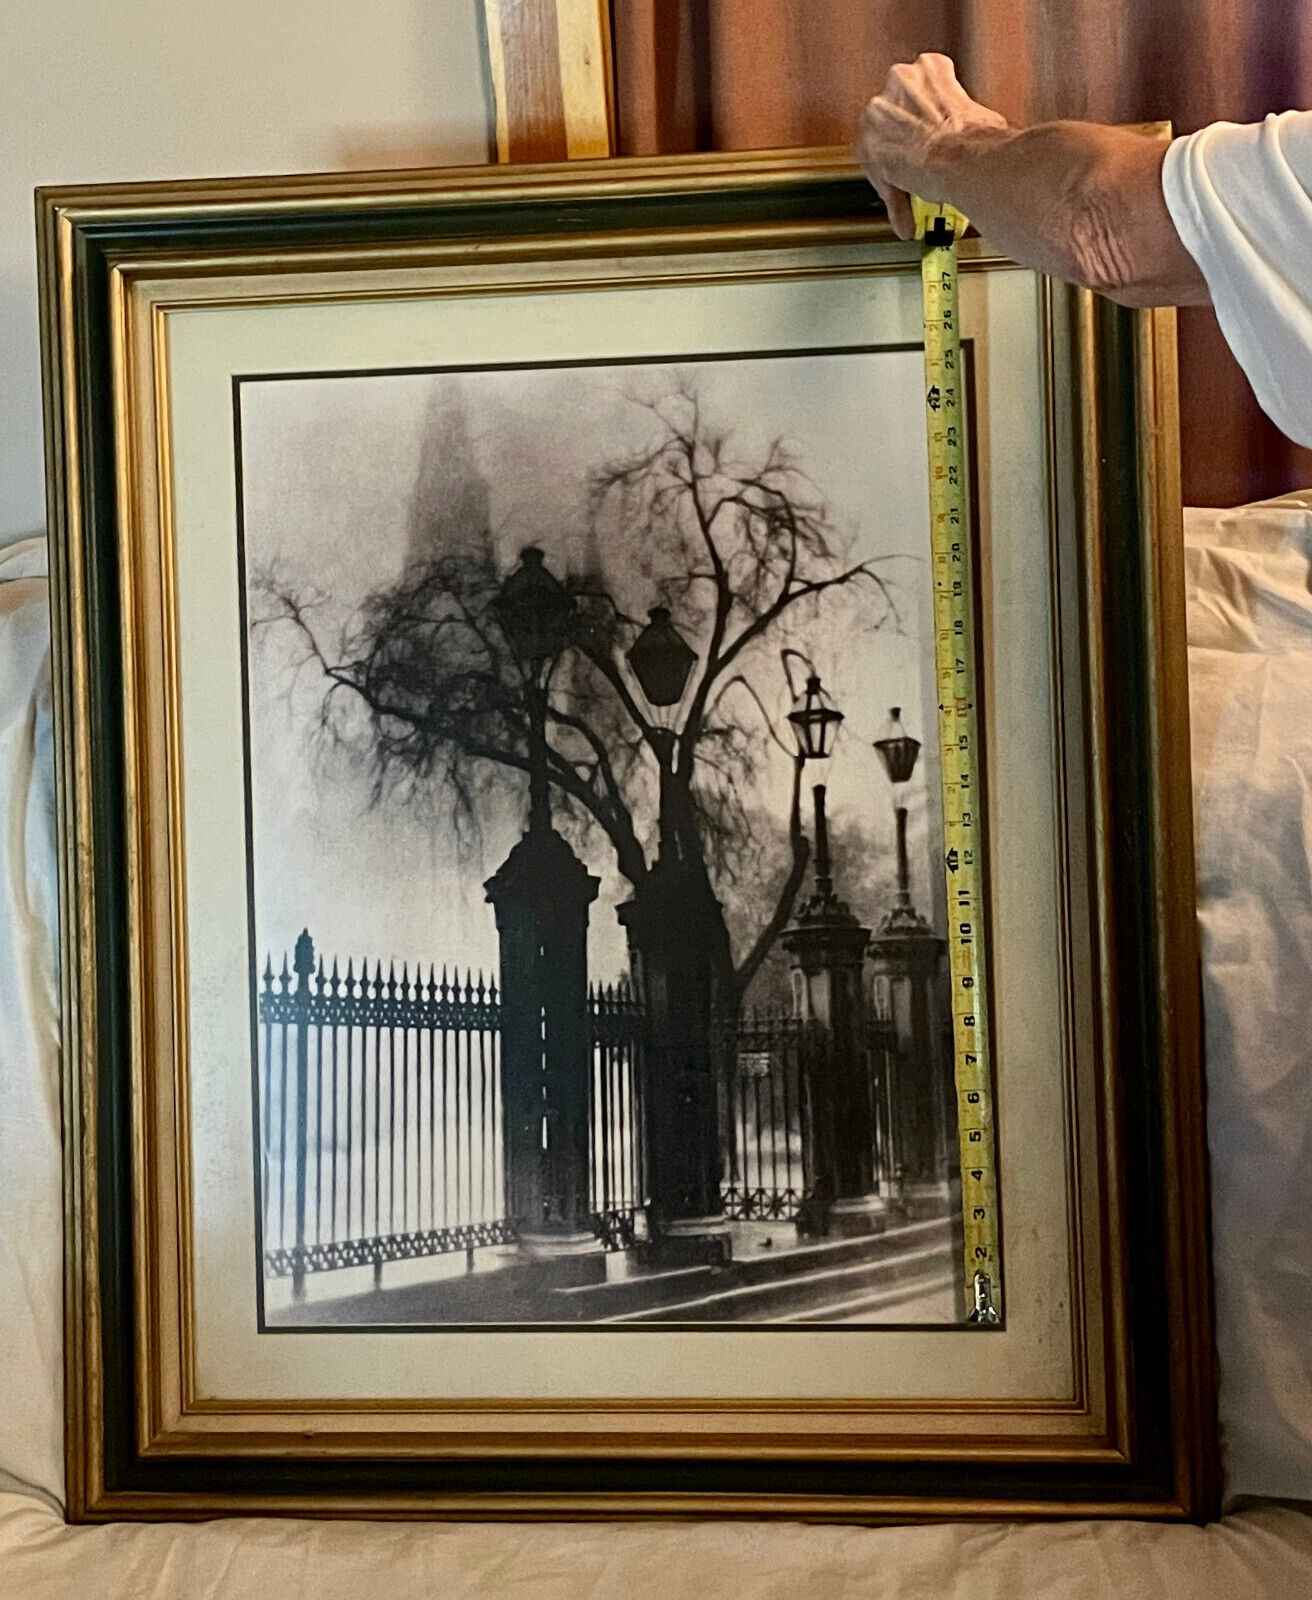 Cathedral In The Mist; Jackson Square, N. Orleans, Louisiana; Dbl matted; Framed